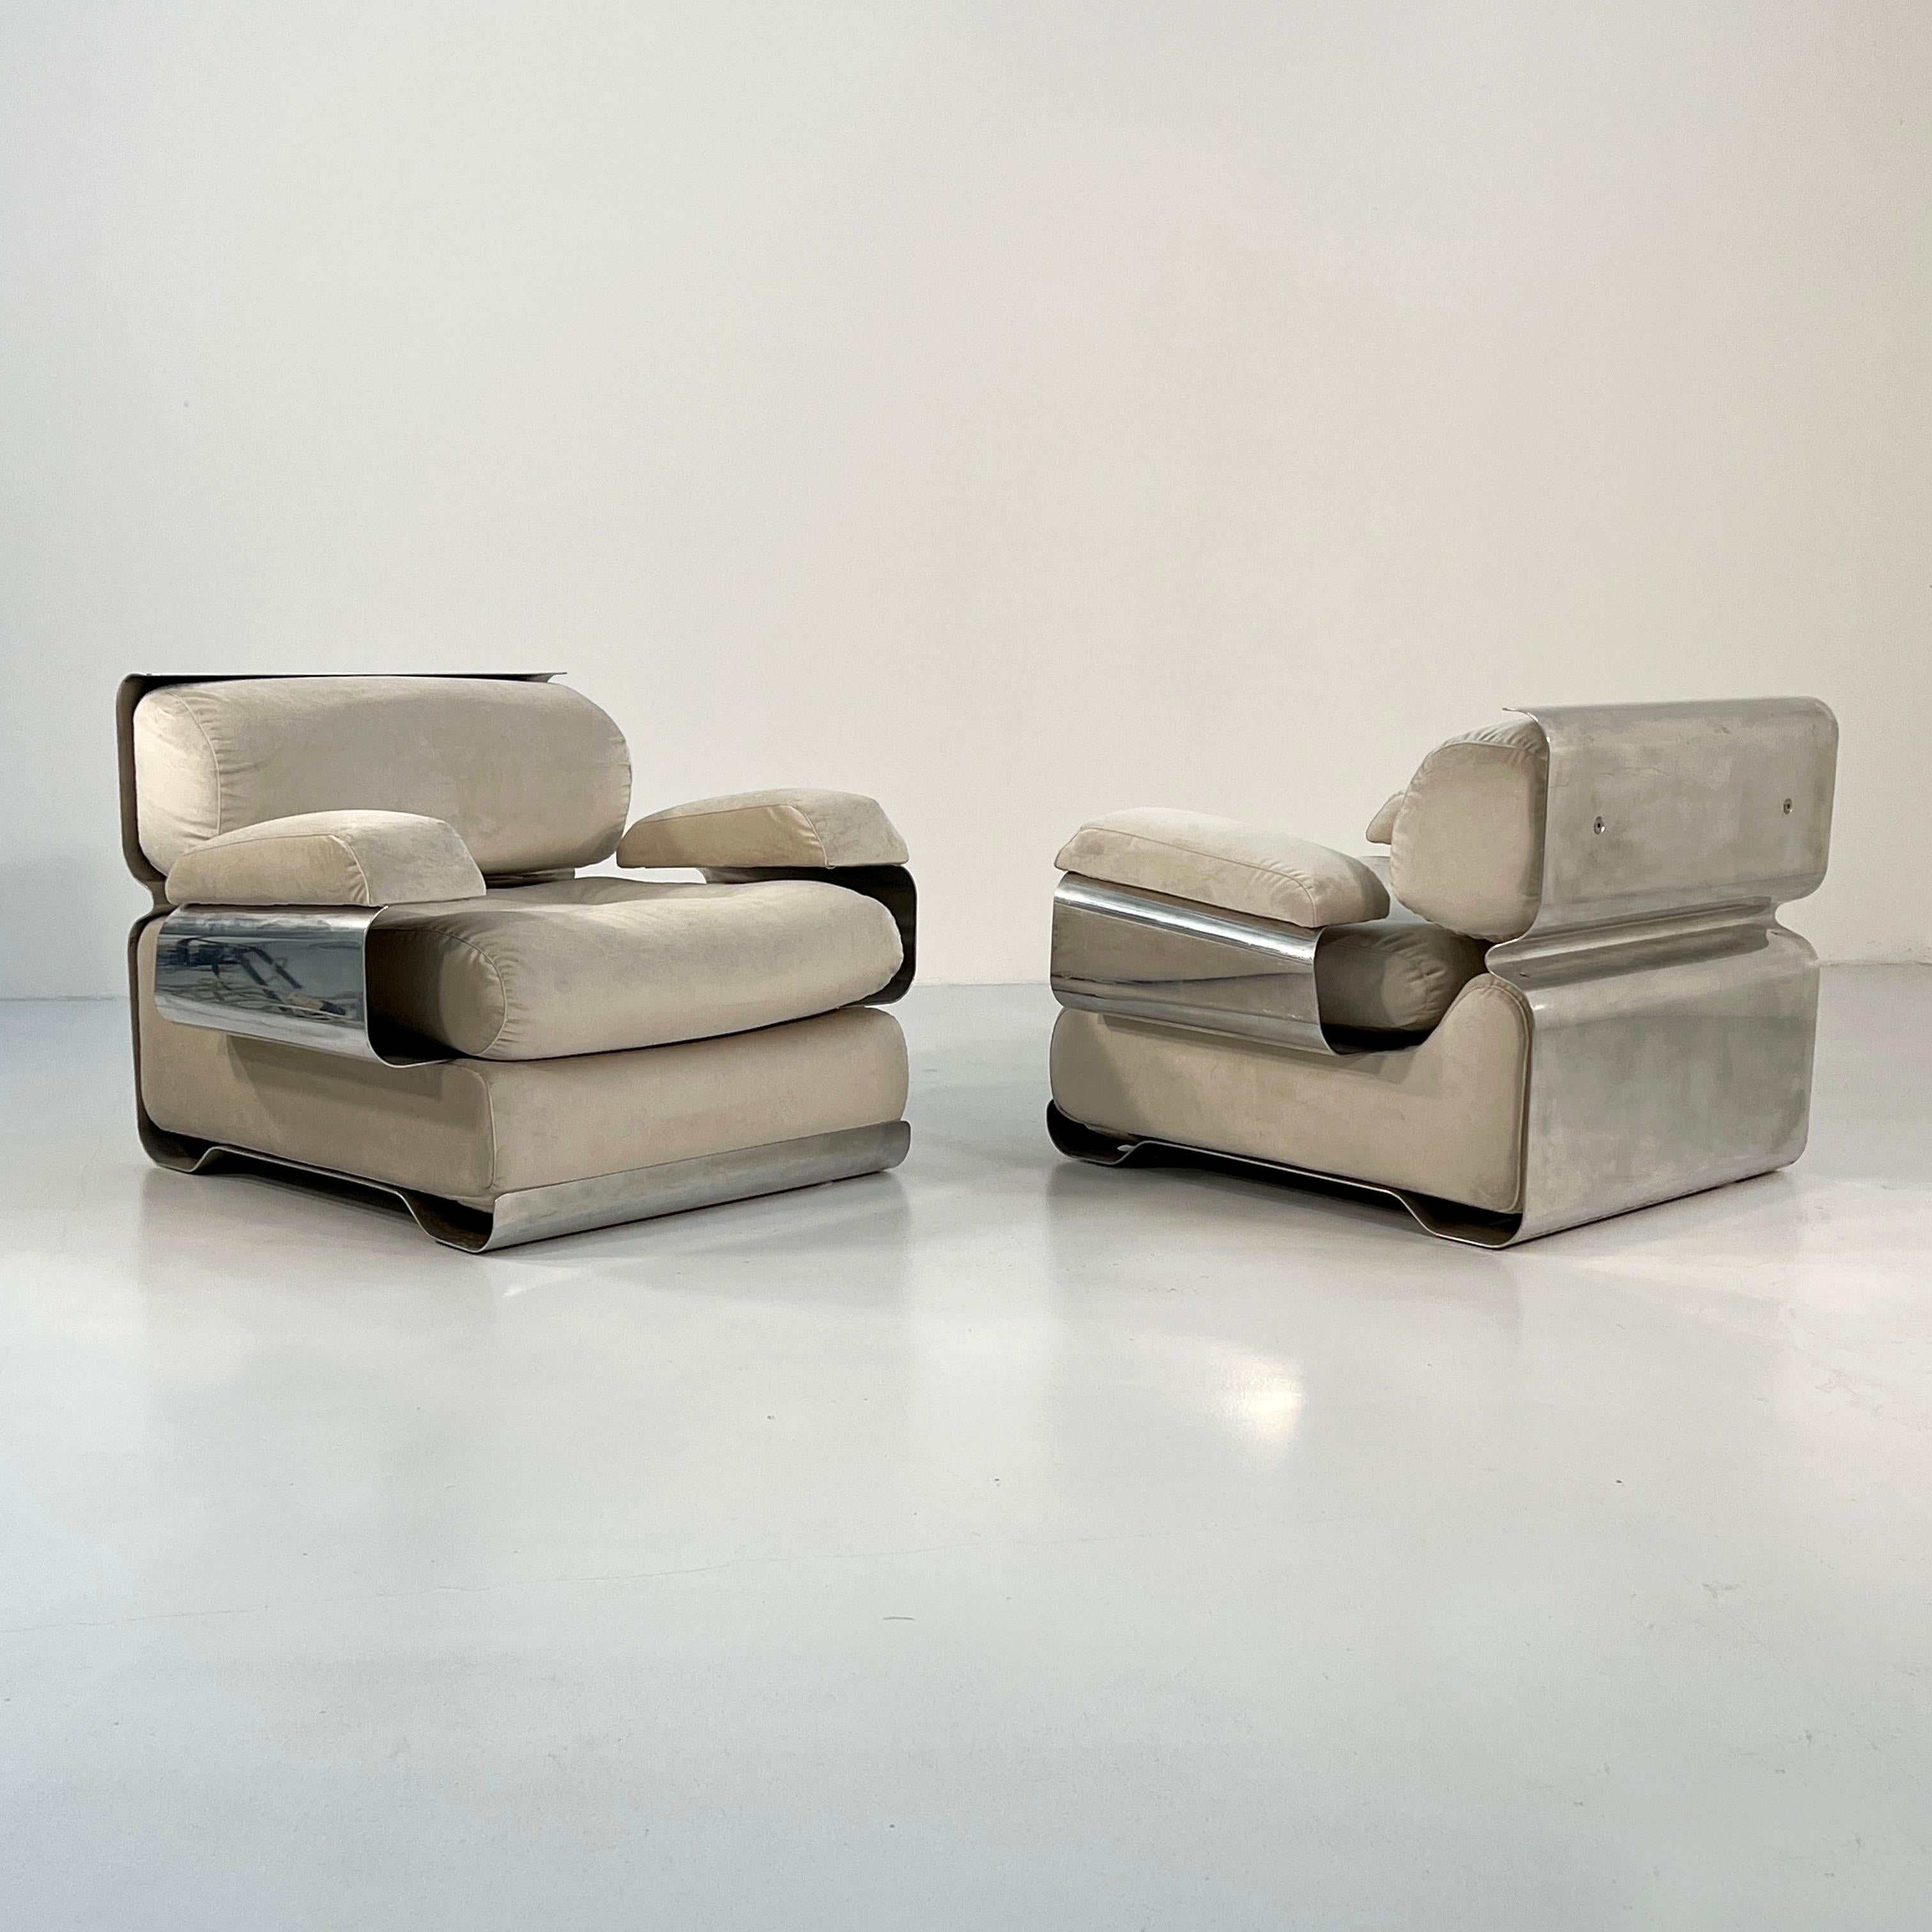 Late 20th Century Pair of Armchairs by Gian Pietro Arosio for D.A.S, 1970s